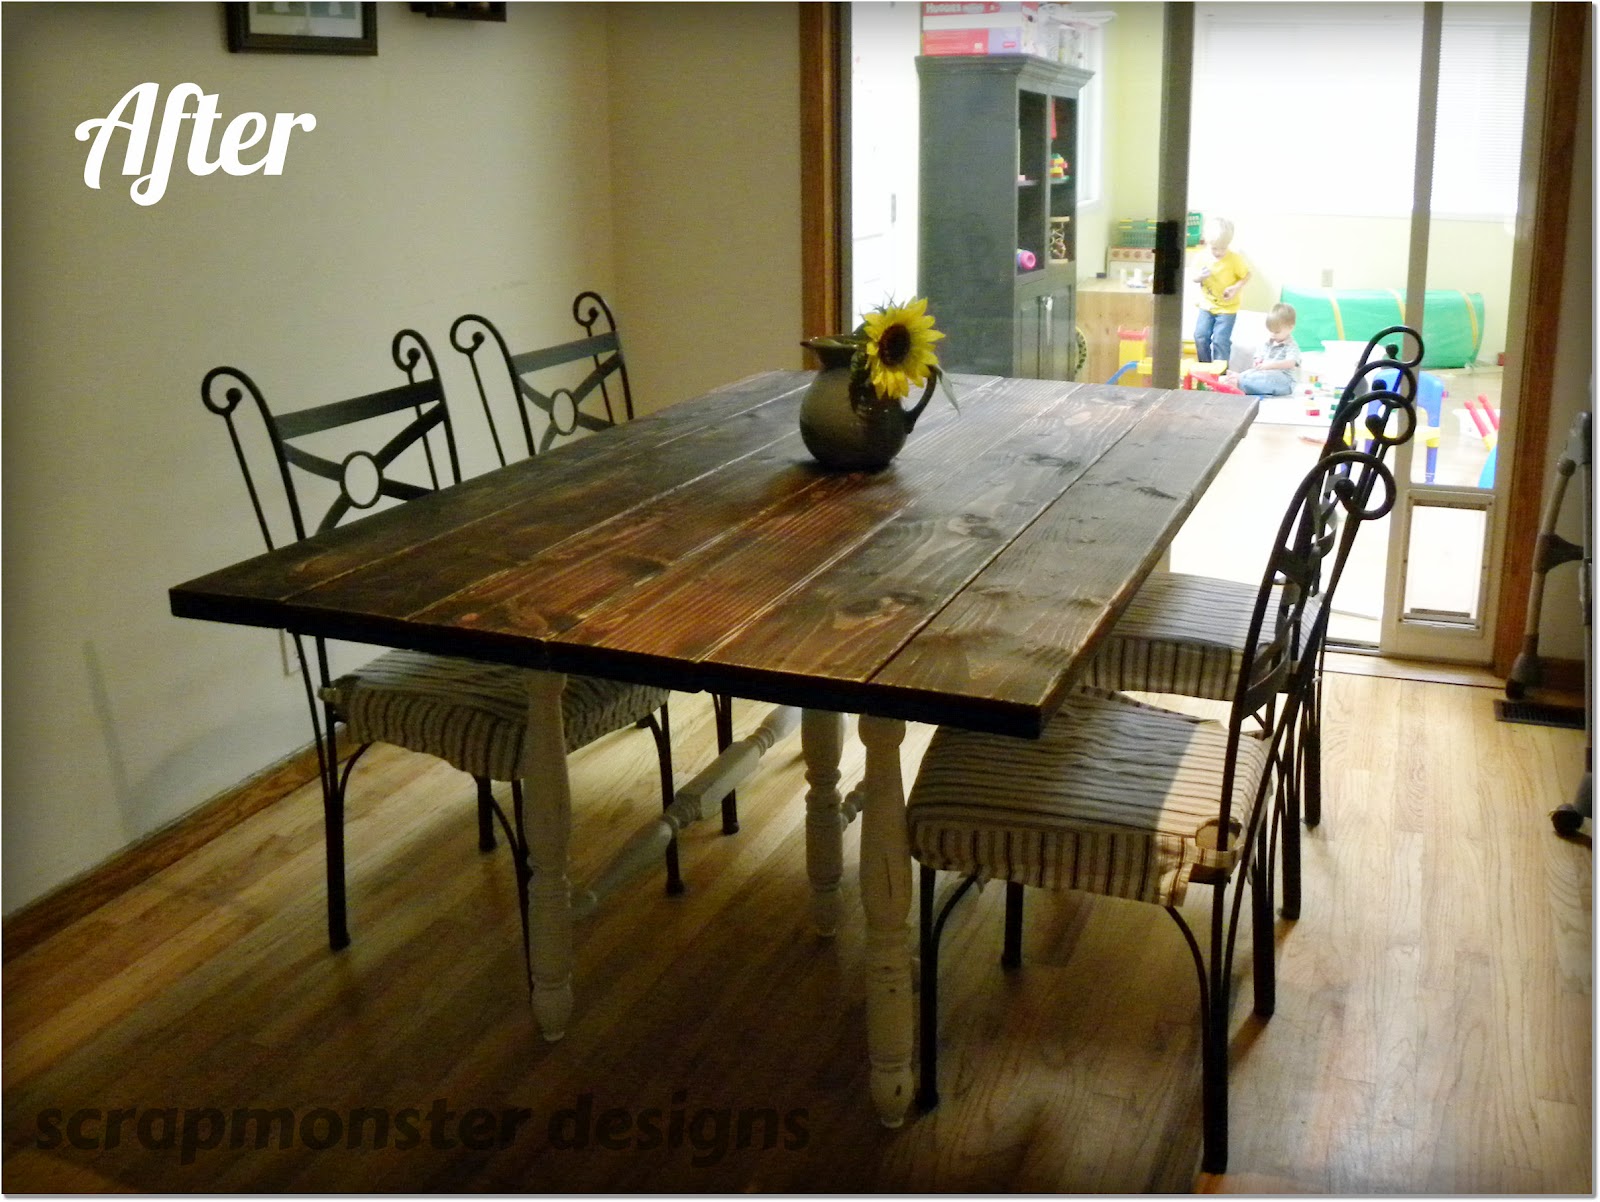 scrapmonster: Rustic Dining Table Make-Over